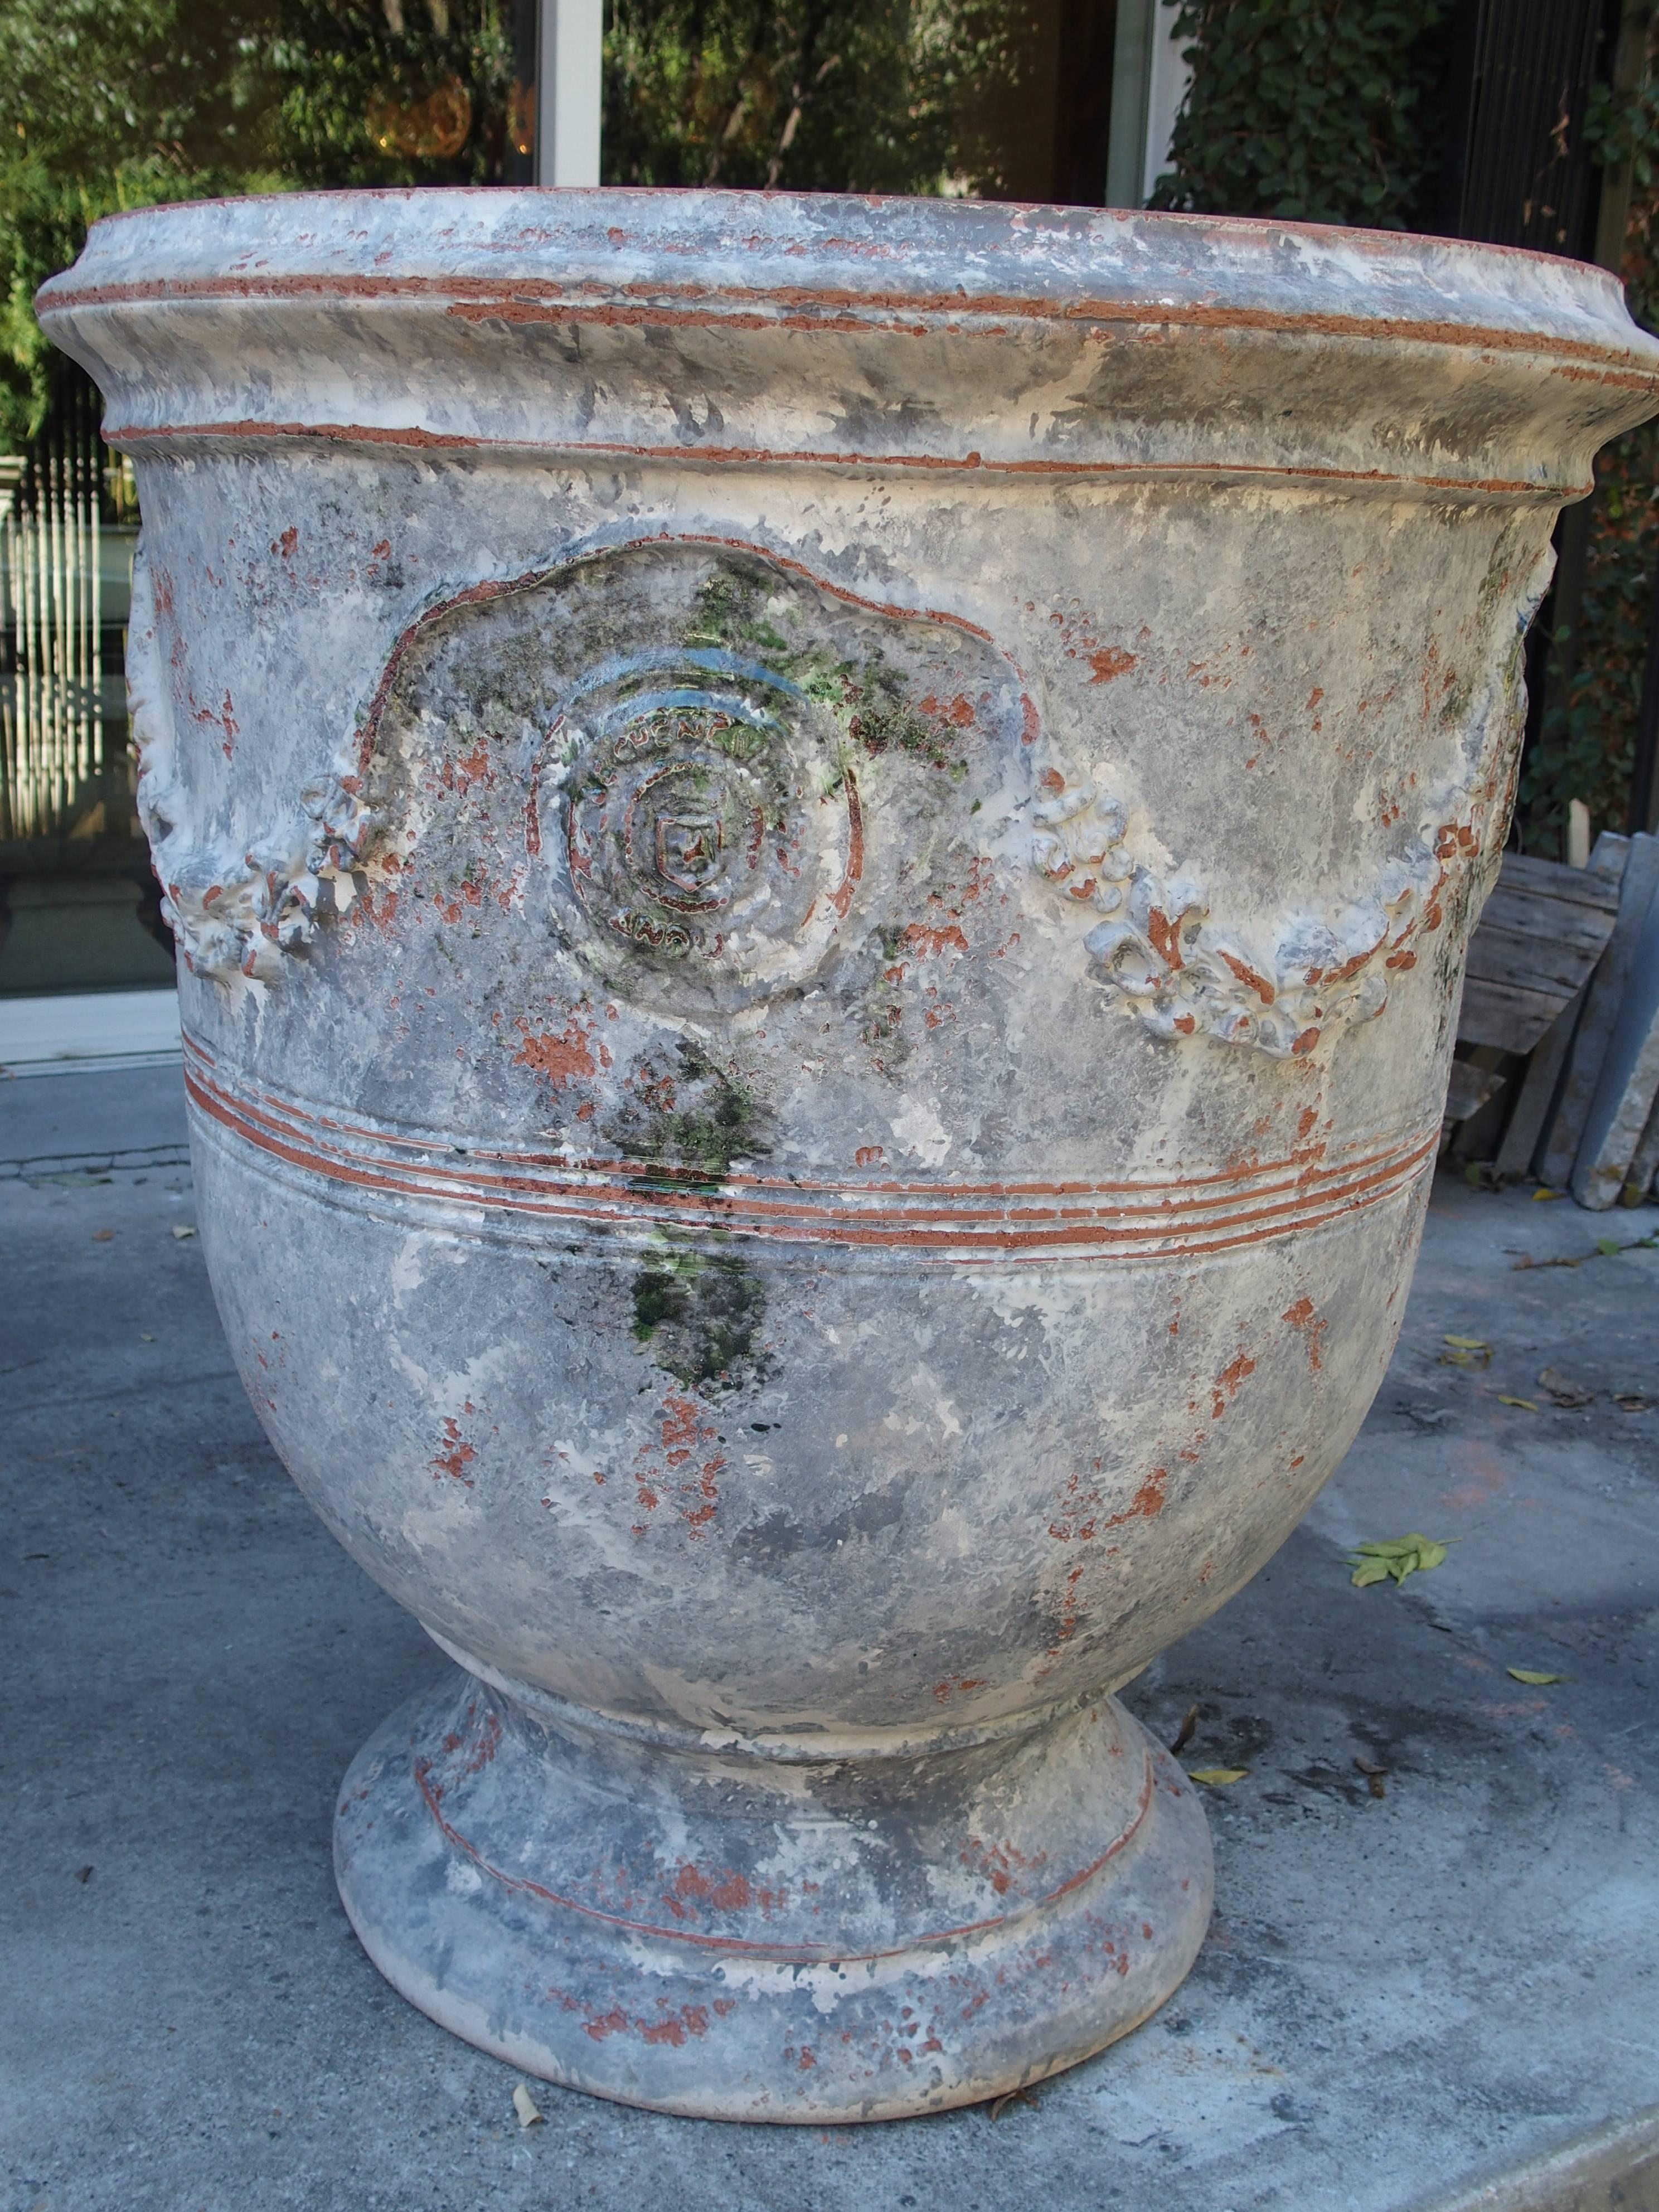 These wonderful painted Anduze pots have been finished with a matte white and blue-grey paint and purposely distressed. Originally, in the 17th century, these types of large pots were used for planting lemon and orange trees. Today, they can be used